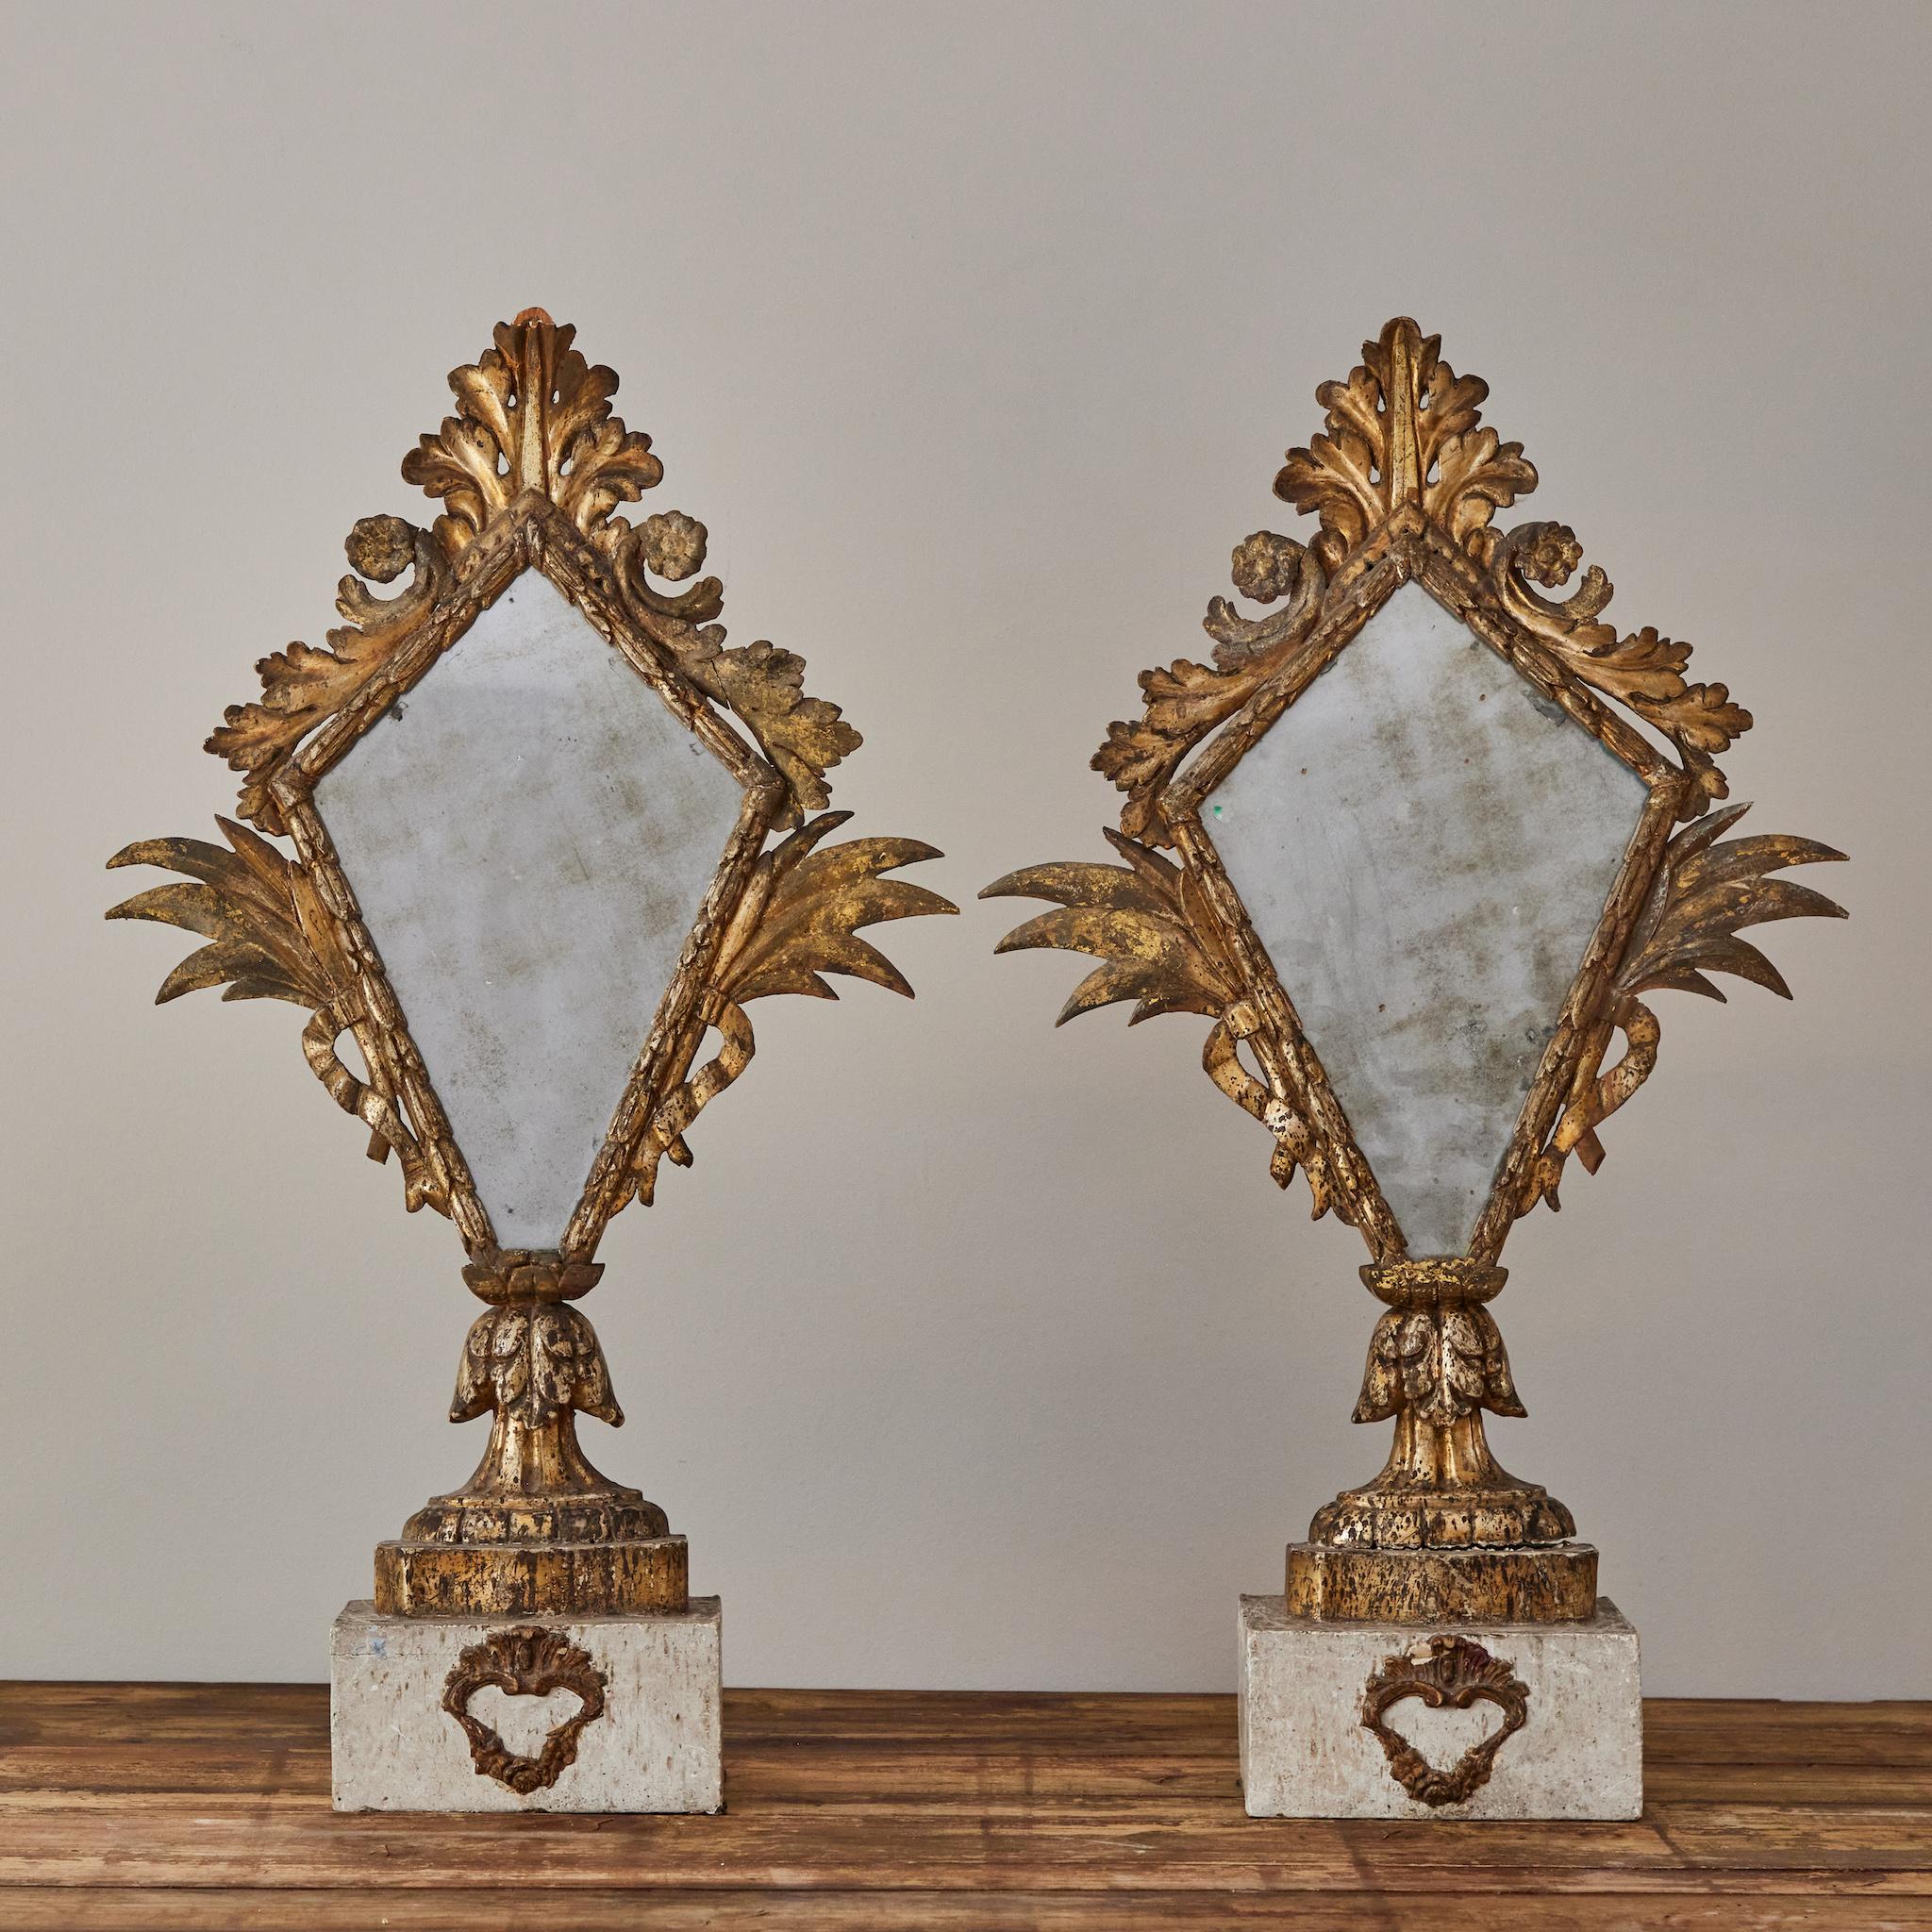 Pair of French Empire style painted and gilt wood brackets or sconces with original mirrors. The glass is smoky and beautifully mottled, the surrounding decoration in wonderful condition. A sumptuous, romantic addition to any space.
